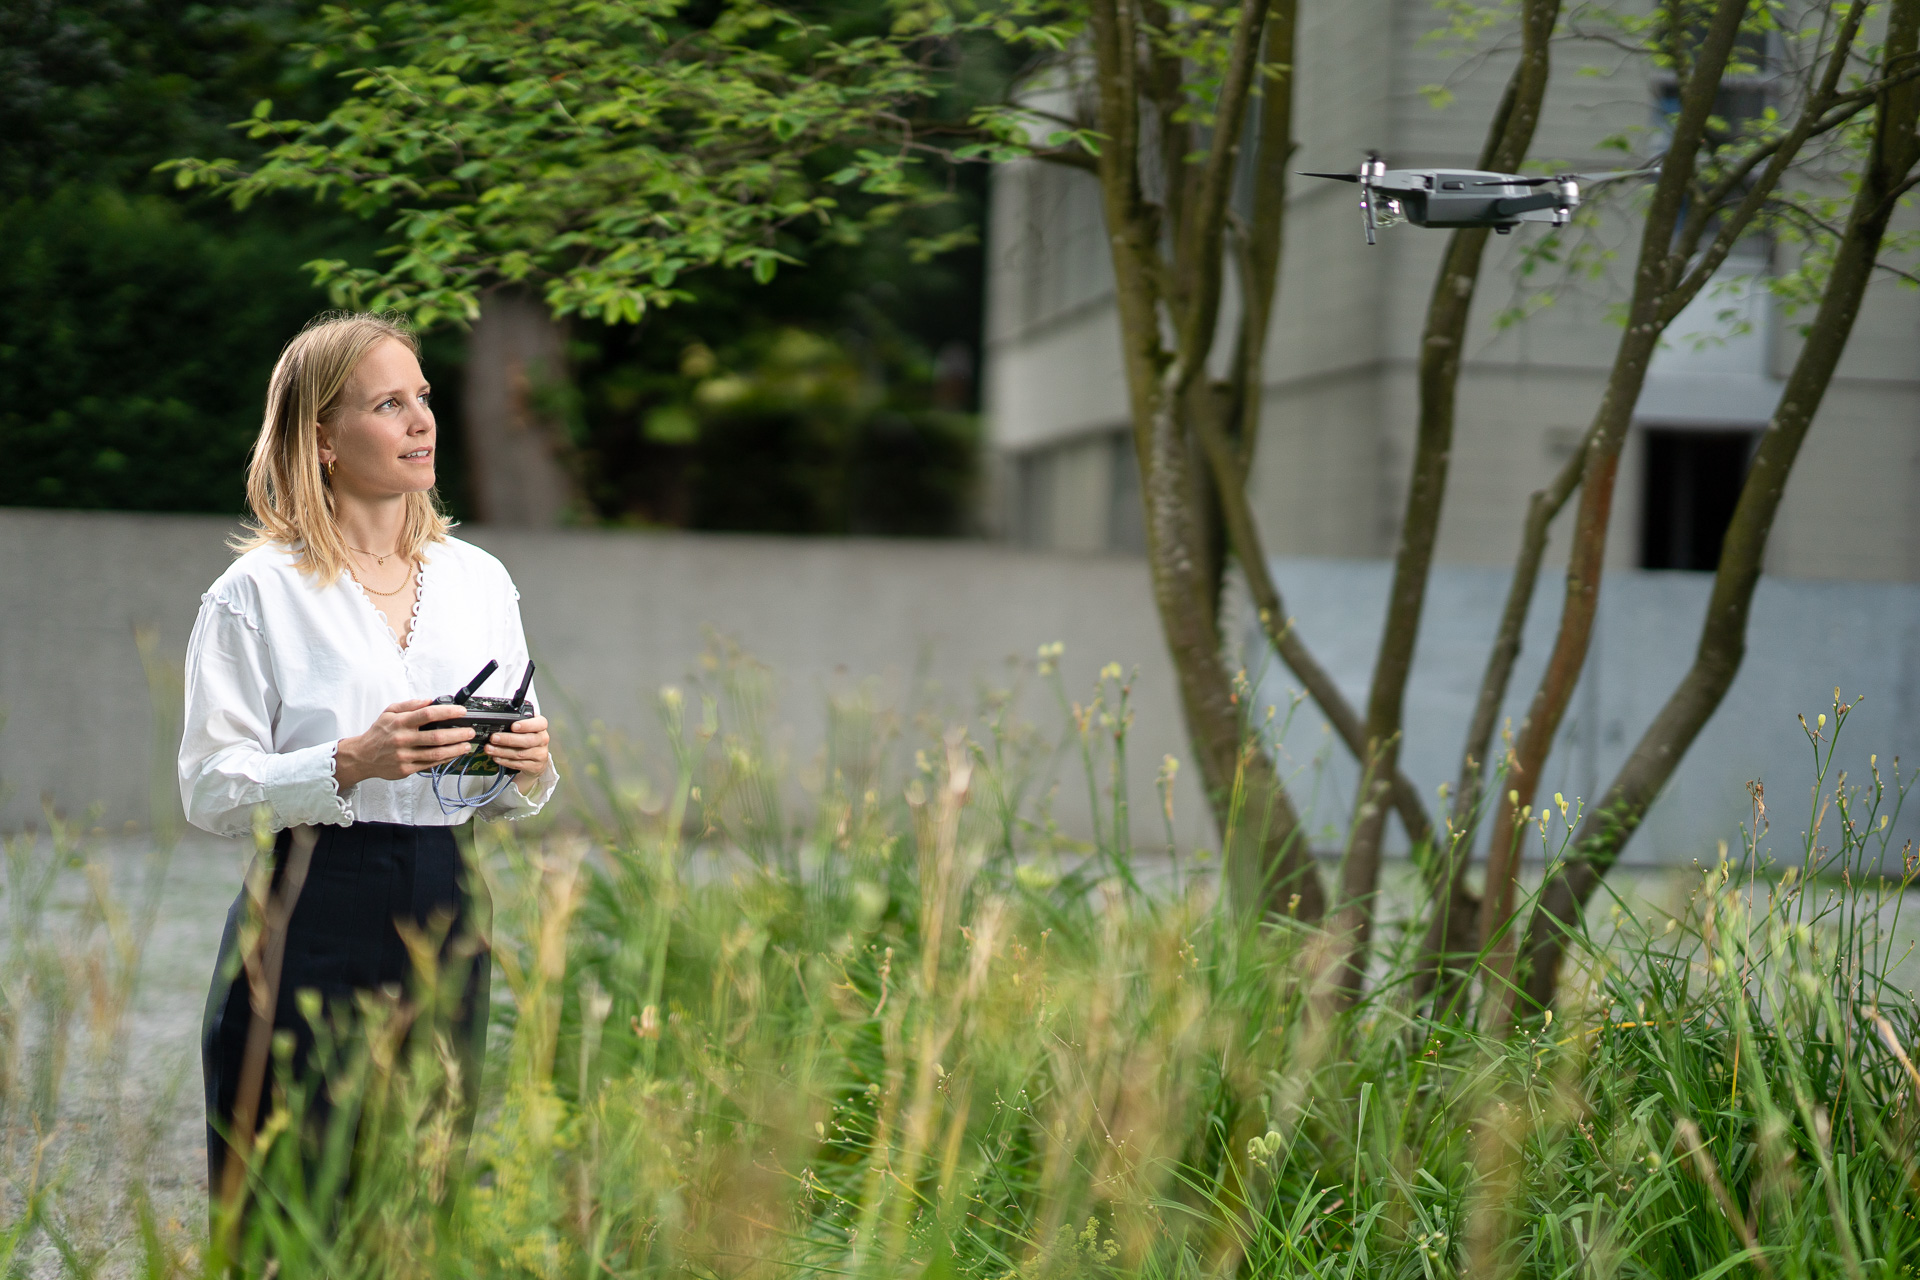 Kathrin explored the world of drones during her traineeship.